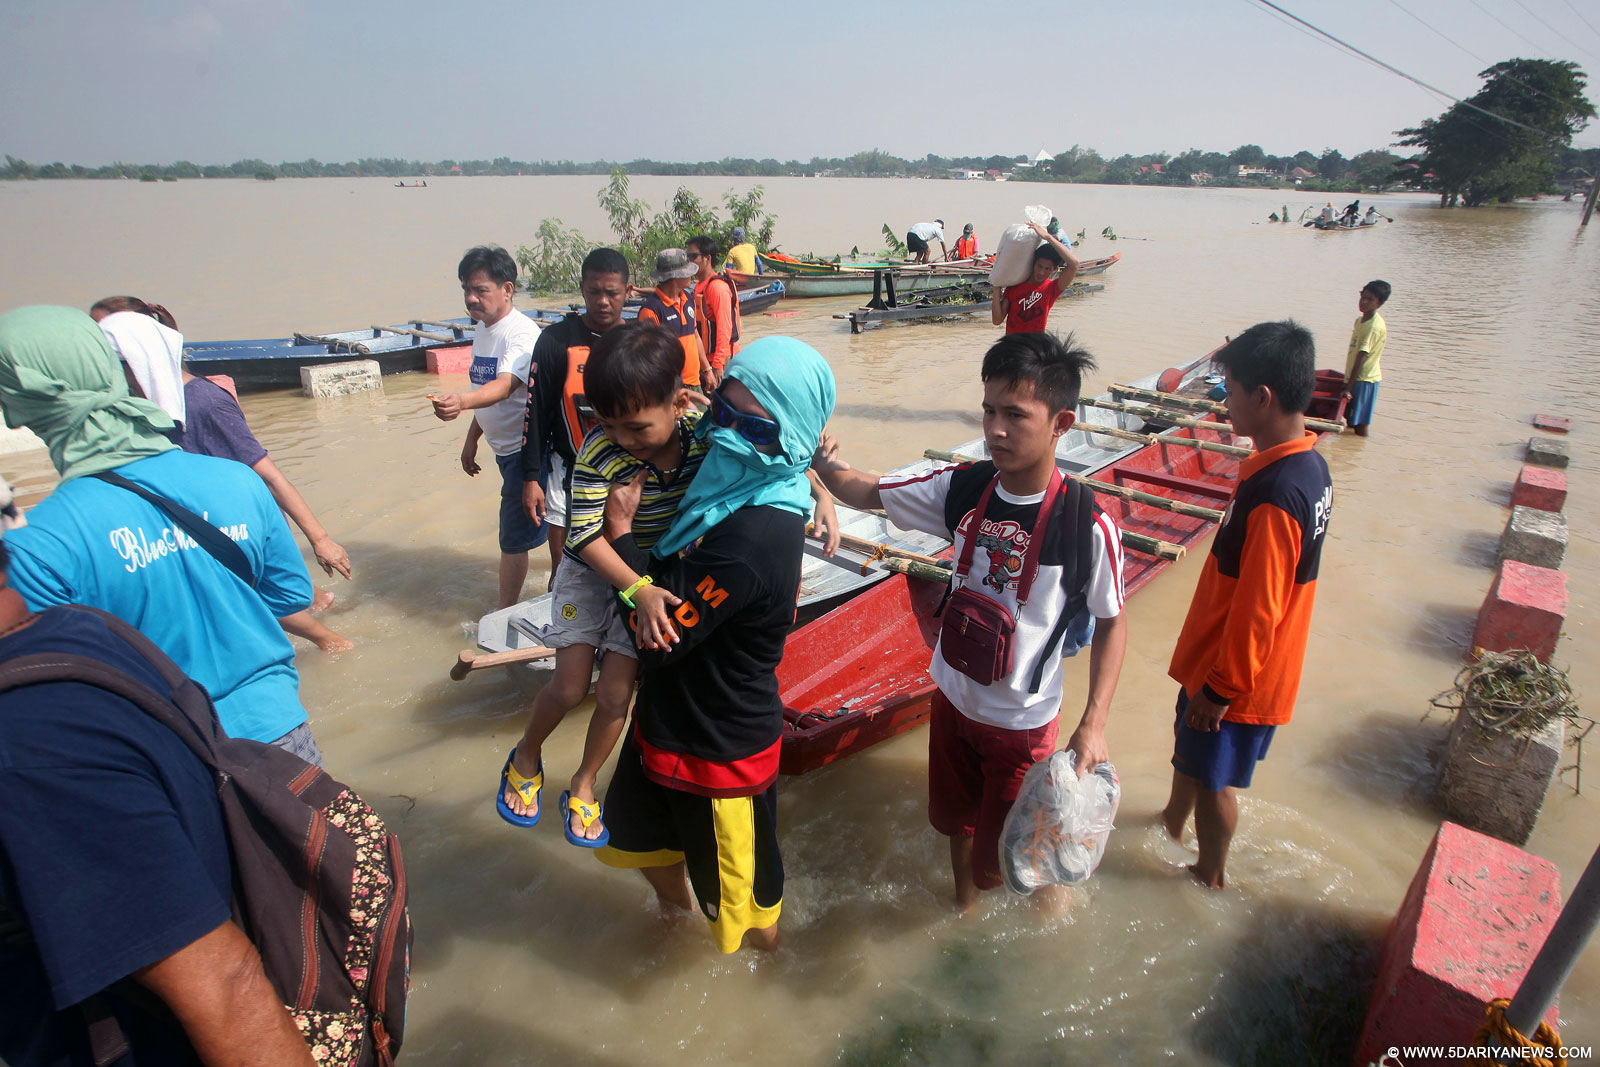 Local rescuers assist residents in Pampanga Province, the Philippines, Oct. 22, 2015. The Philippines